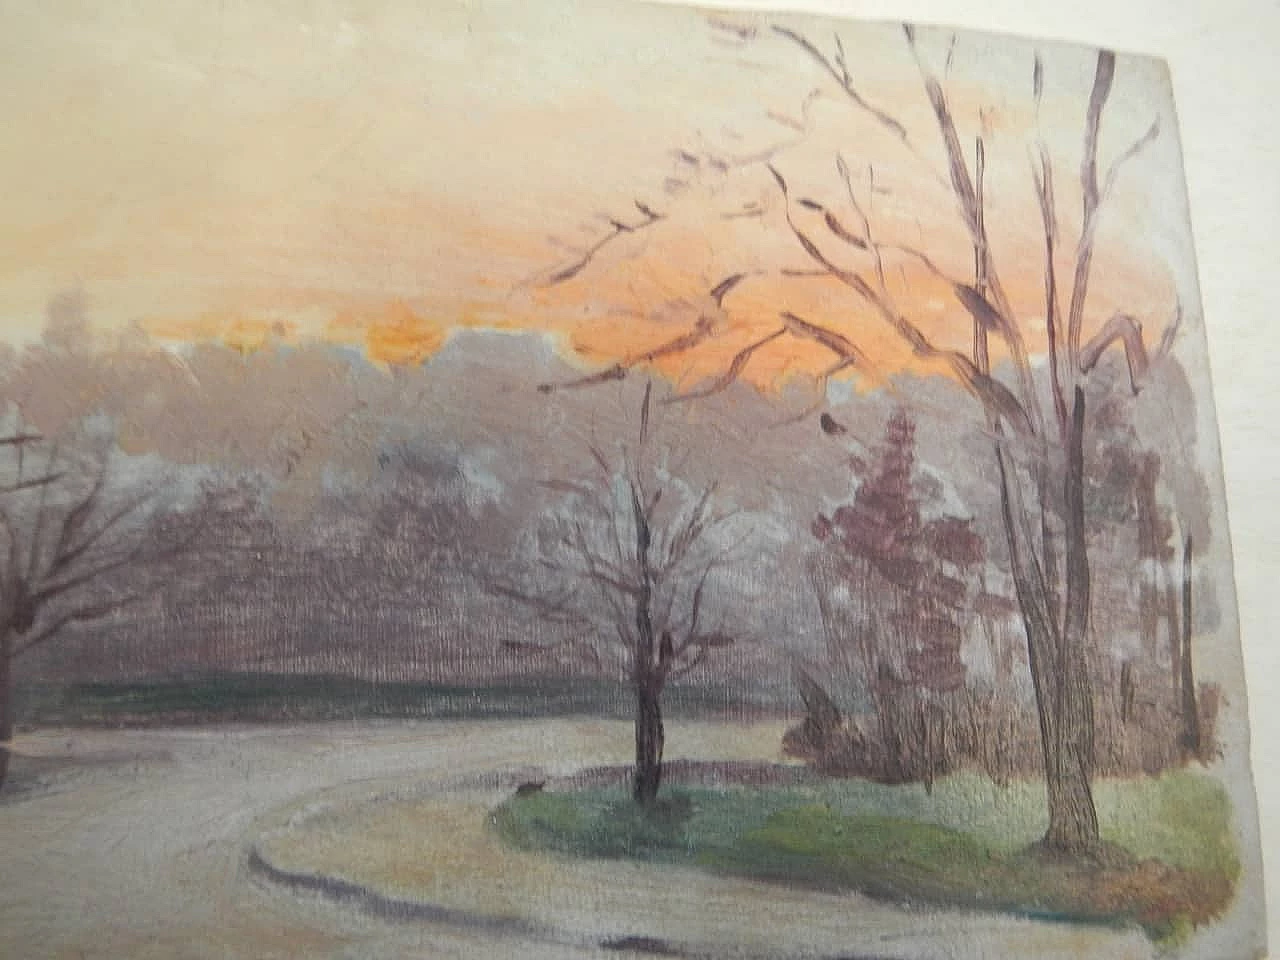 Des Champs, sunset, painting on wood, early 20th century 6